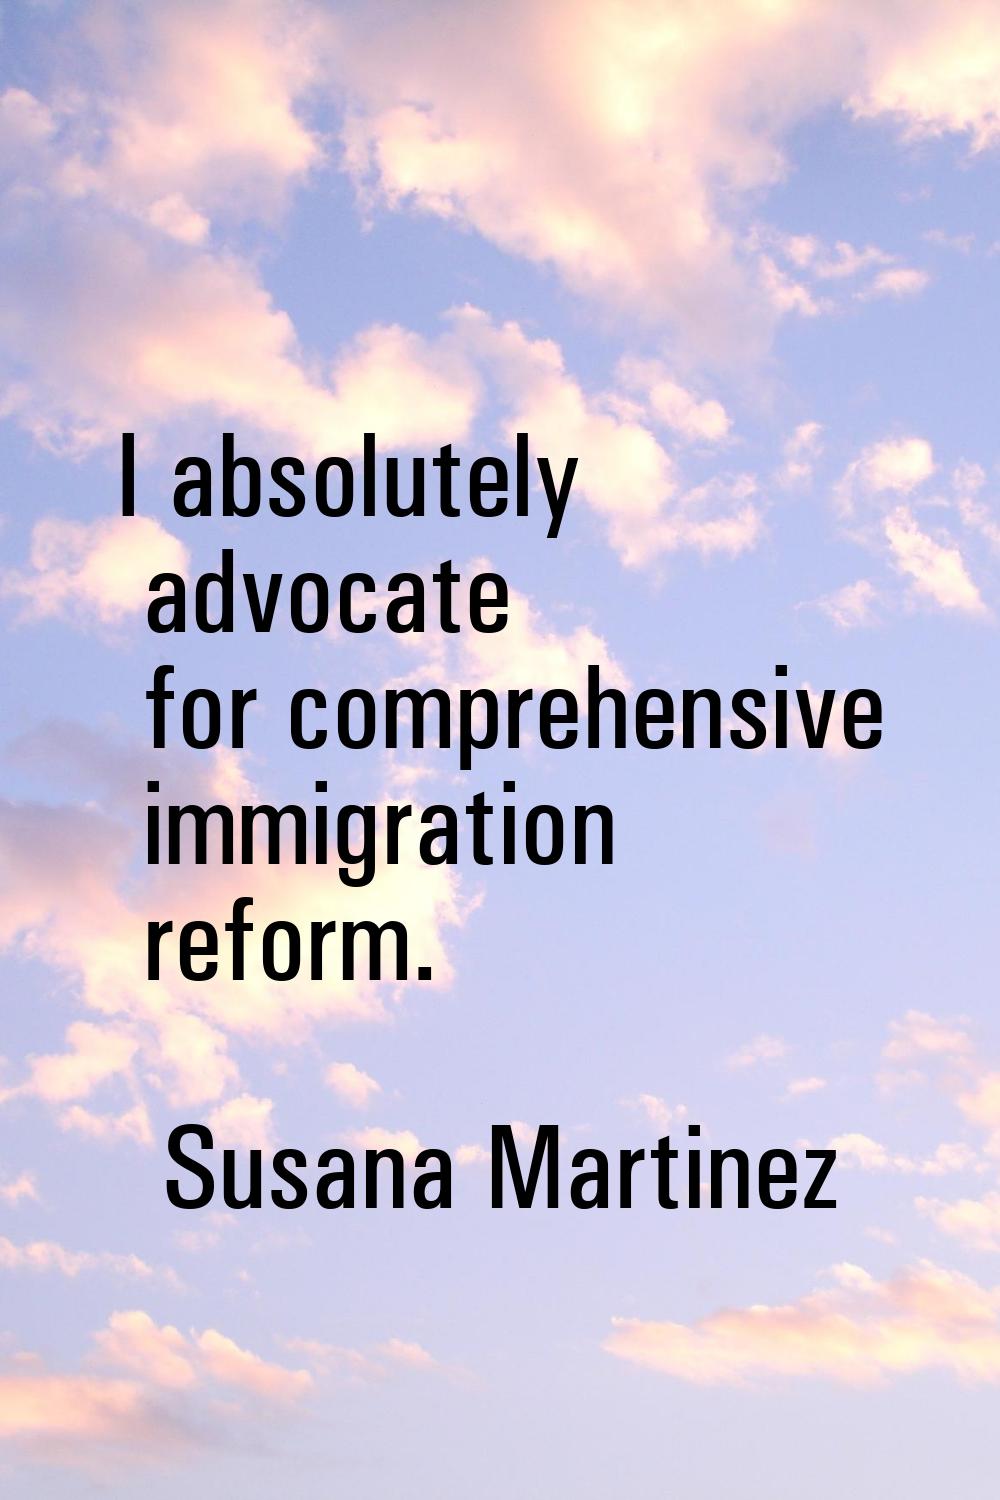 I absolutely advocate for comprehensive immigration reform.